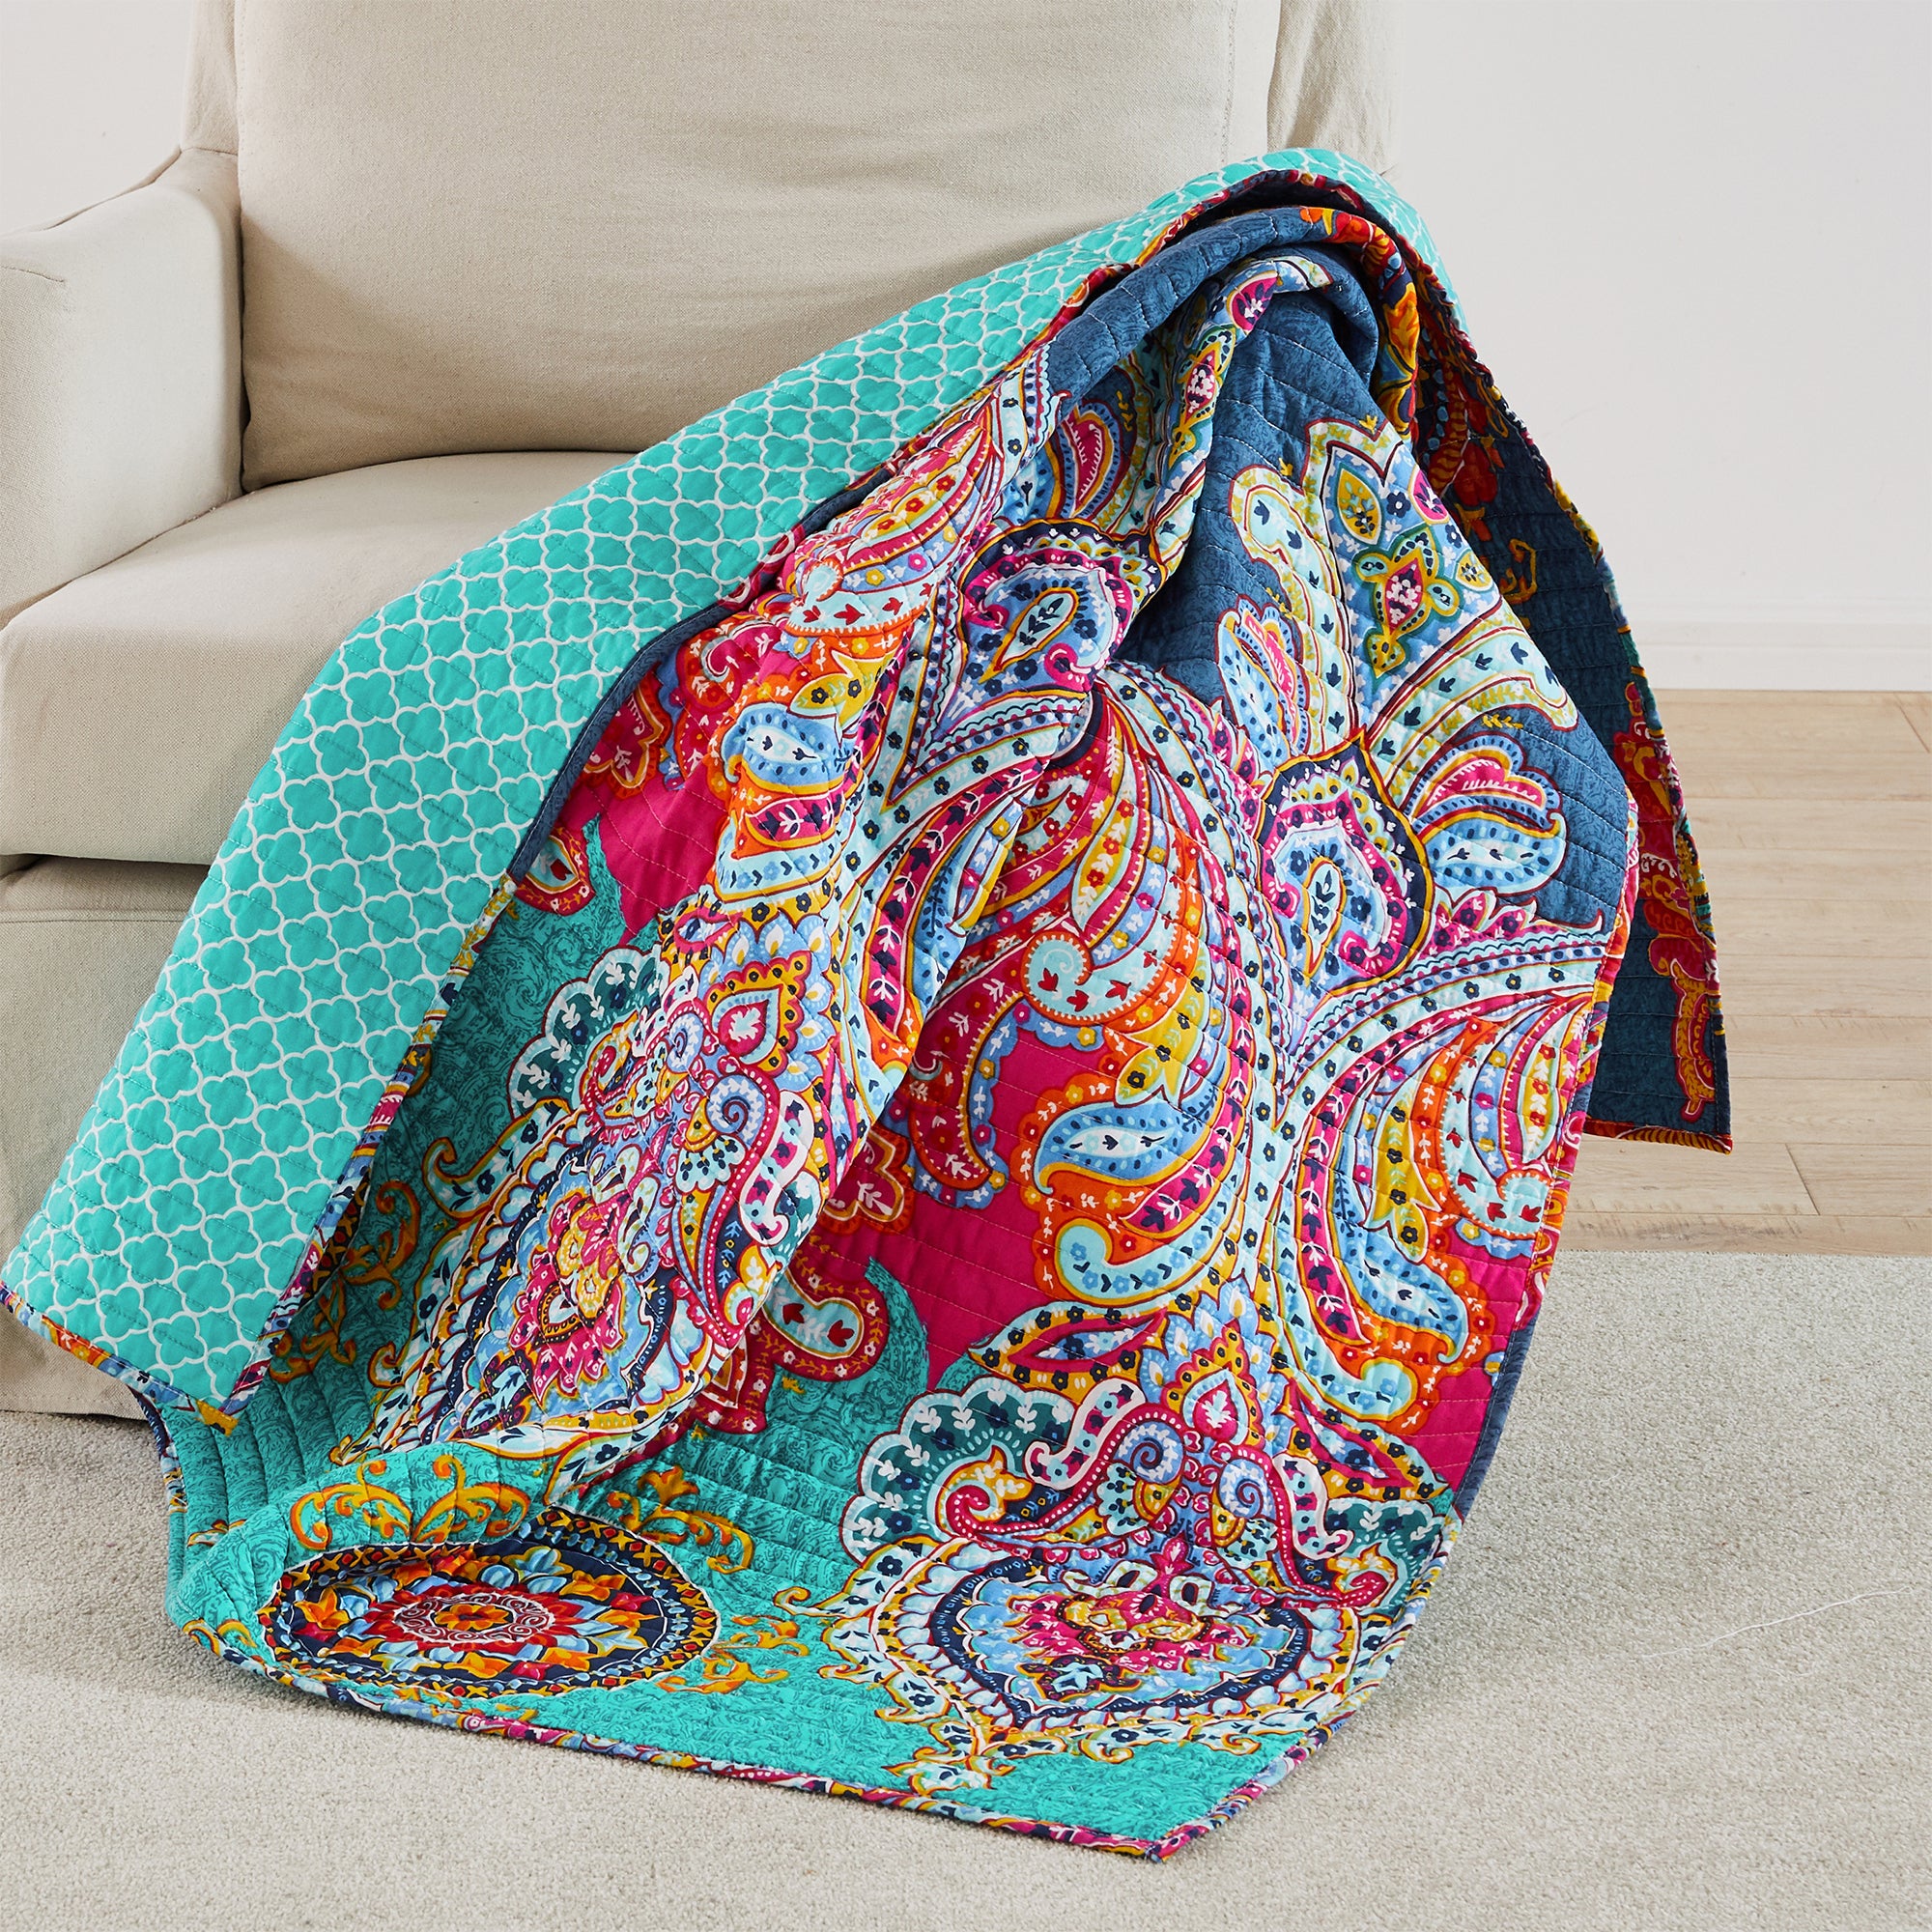 Fantasia Quilted Throw